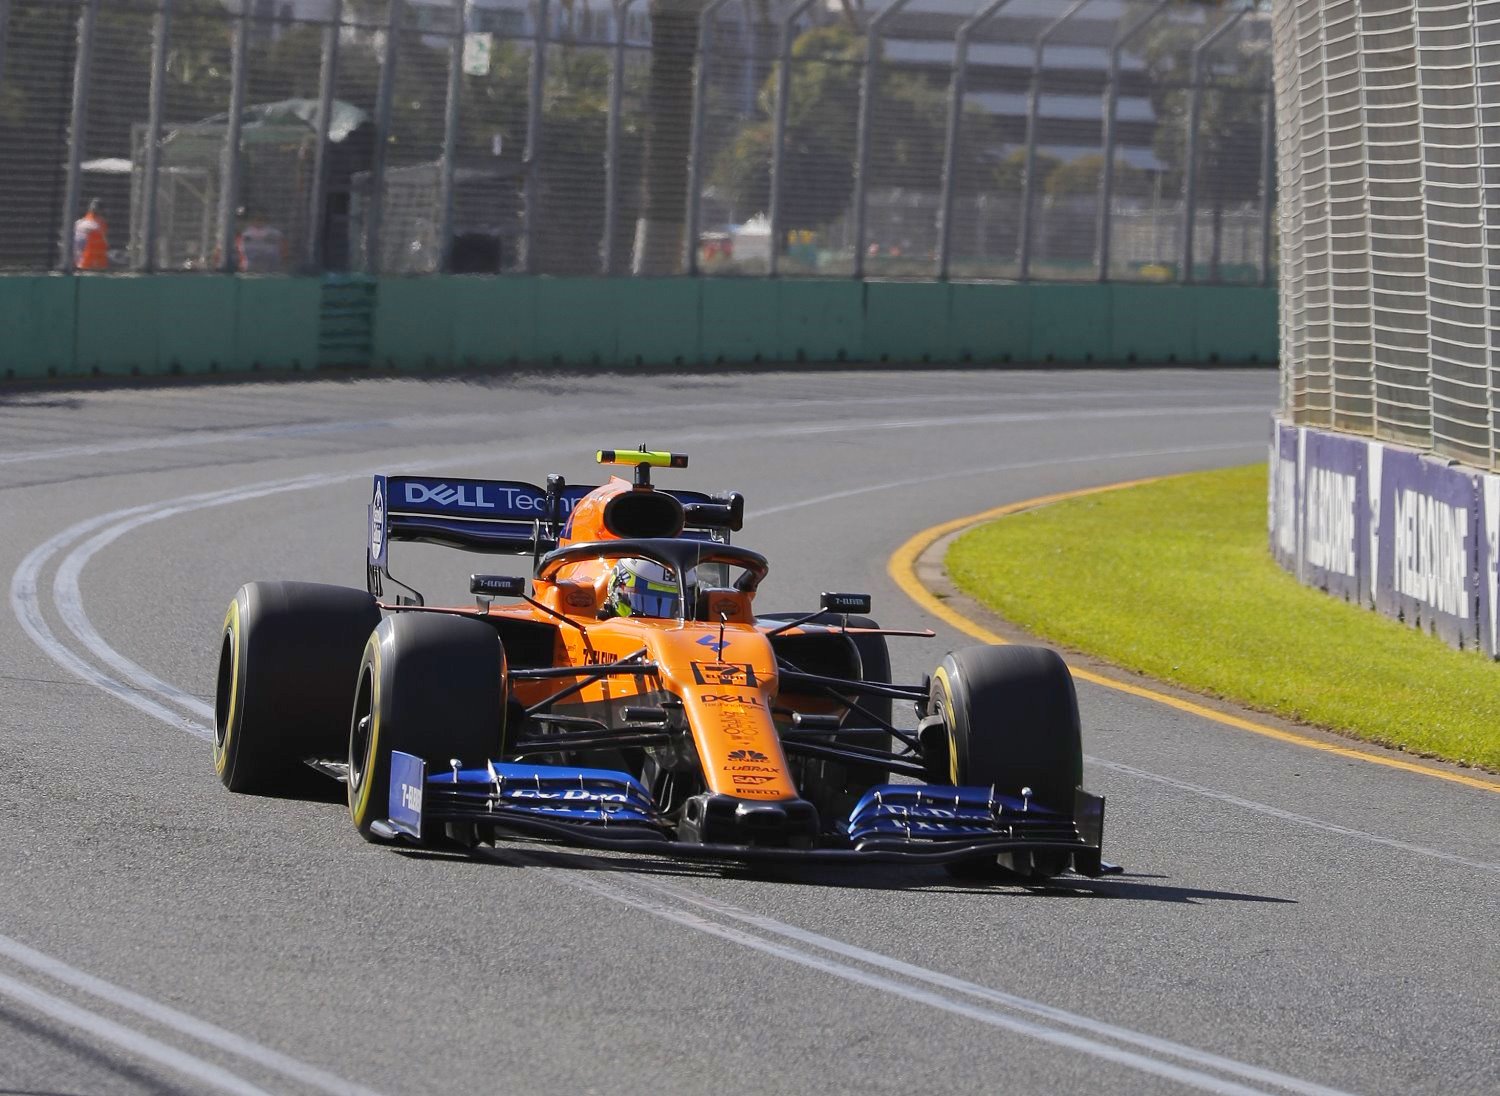 Meanwhile, hapless McLaren continue to run at the back